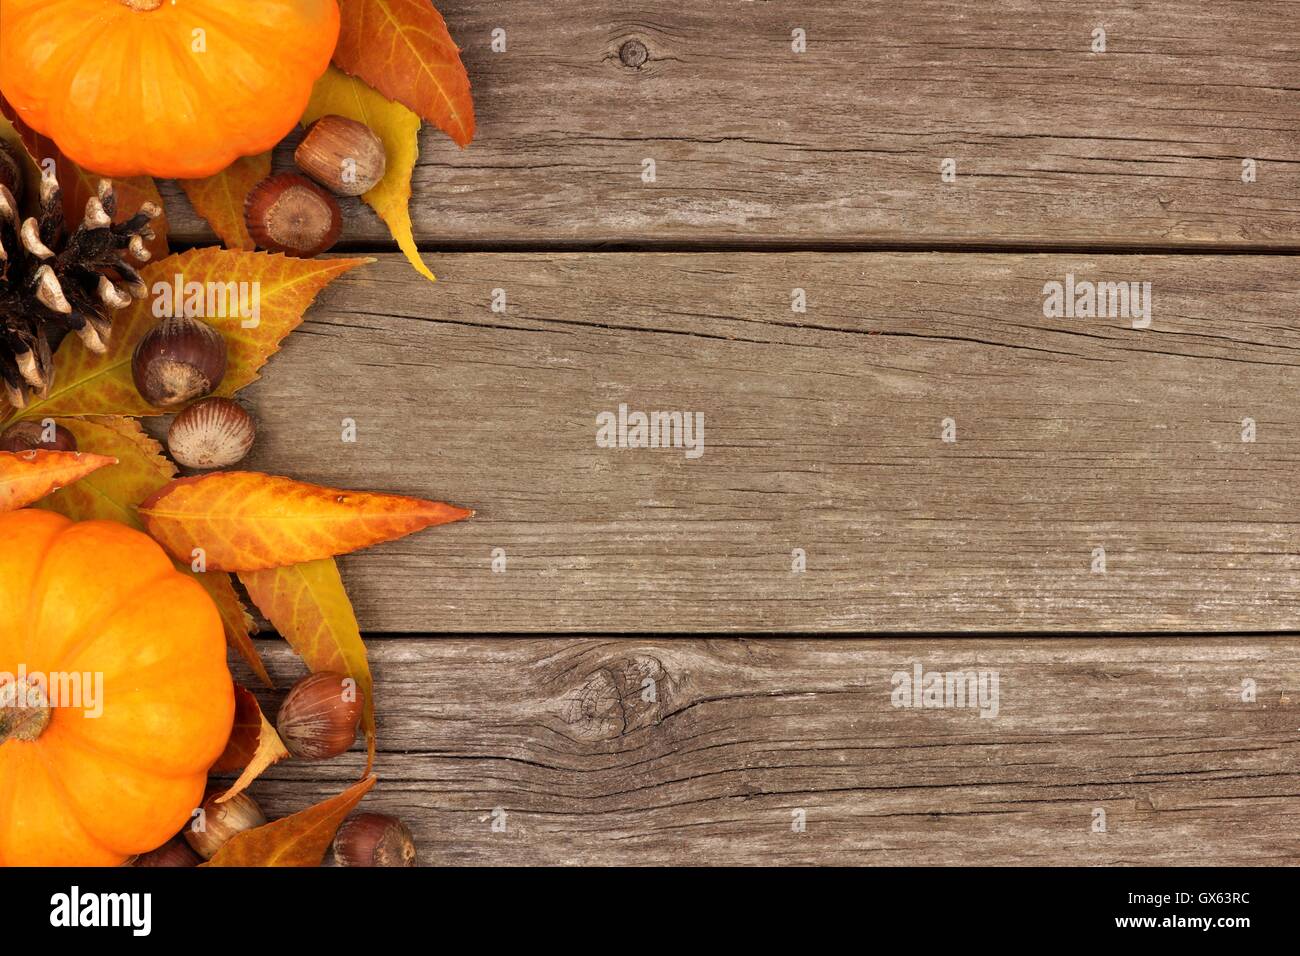 Autumn side border of pumpkins and leaves against a rustic wood background Stock Photo